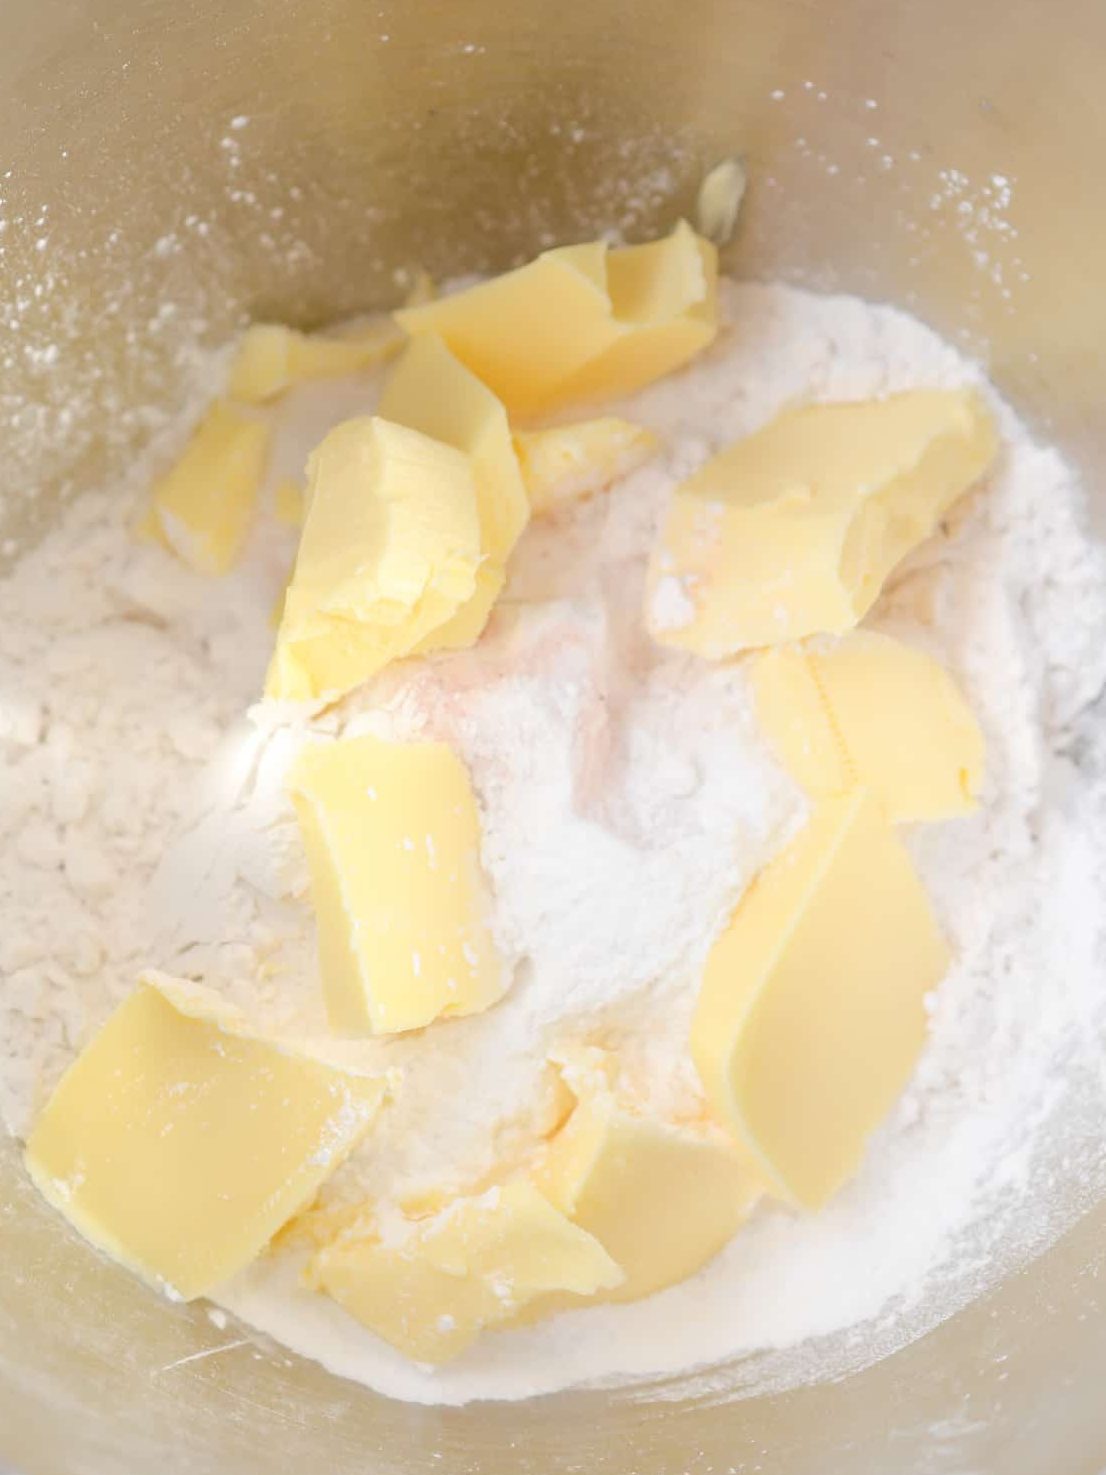 Add the shortenings to the bowl, and cut into the dry ingredients with the tines of a fork until a crumbly dough forms.